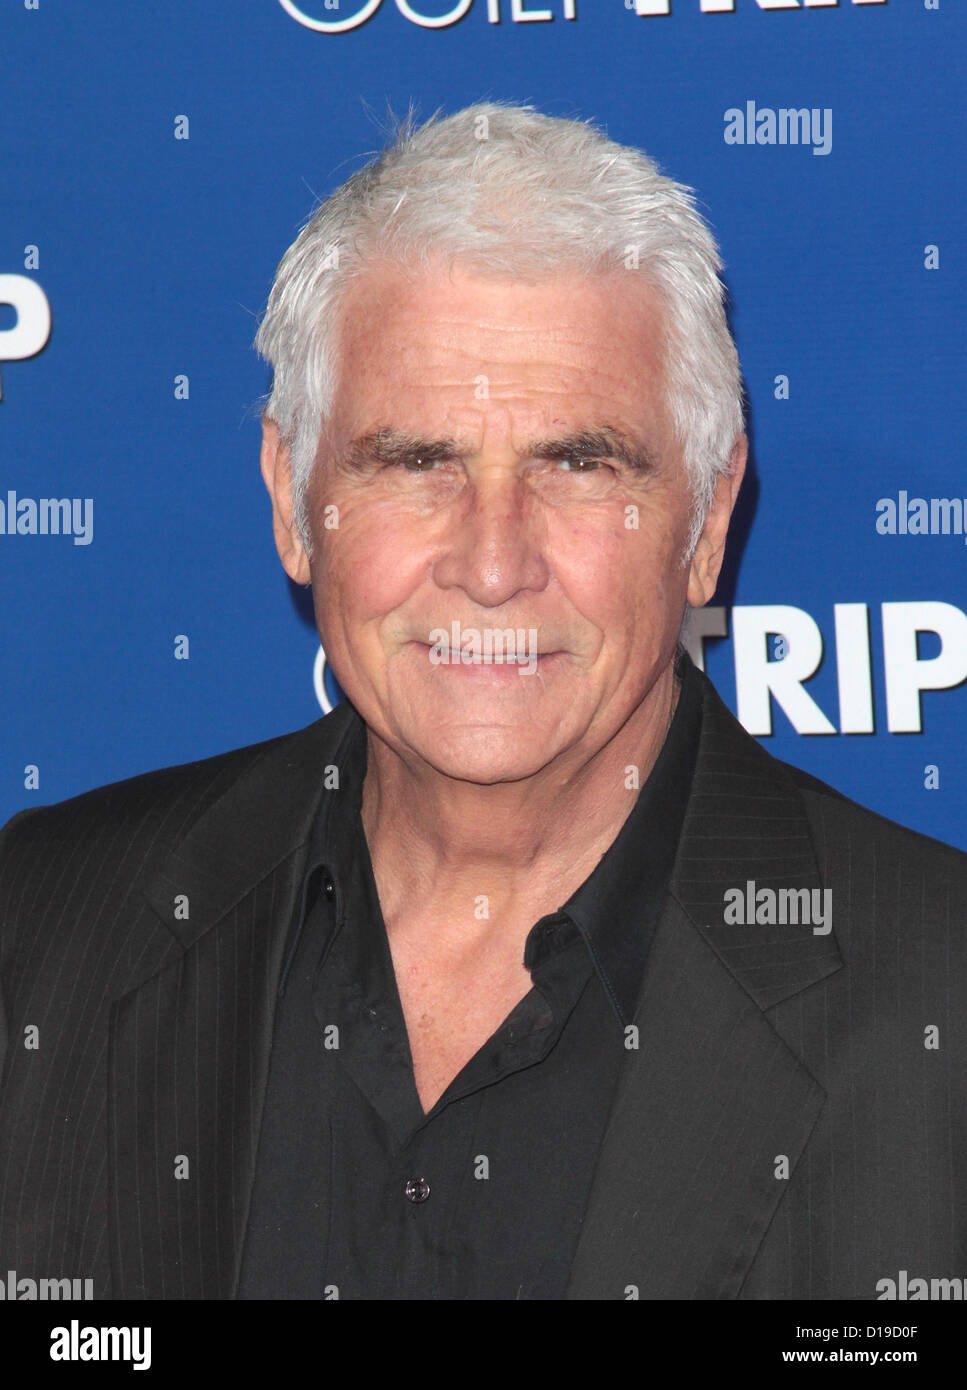 JAMES BROLIN LOS ANGELES PREMIERE OF THE GUILT TRIP WESTWOOD CALIFORNIA USA 11 December 2012 Stock Photo